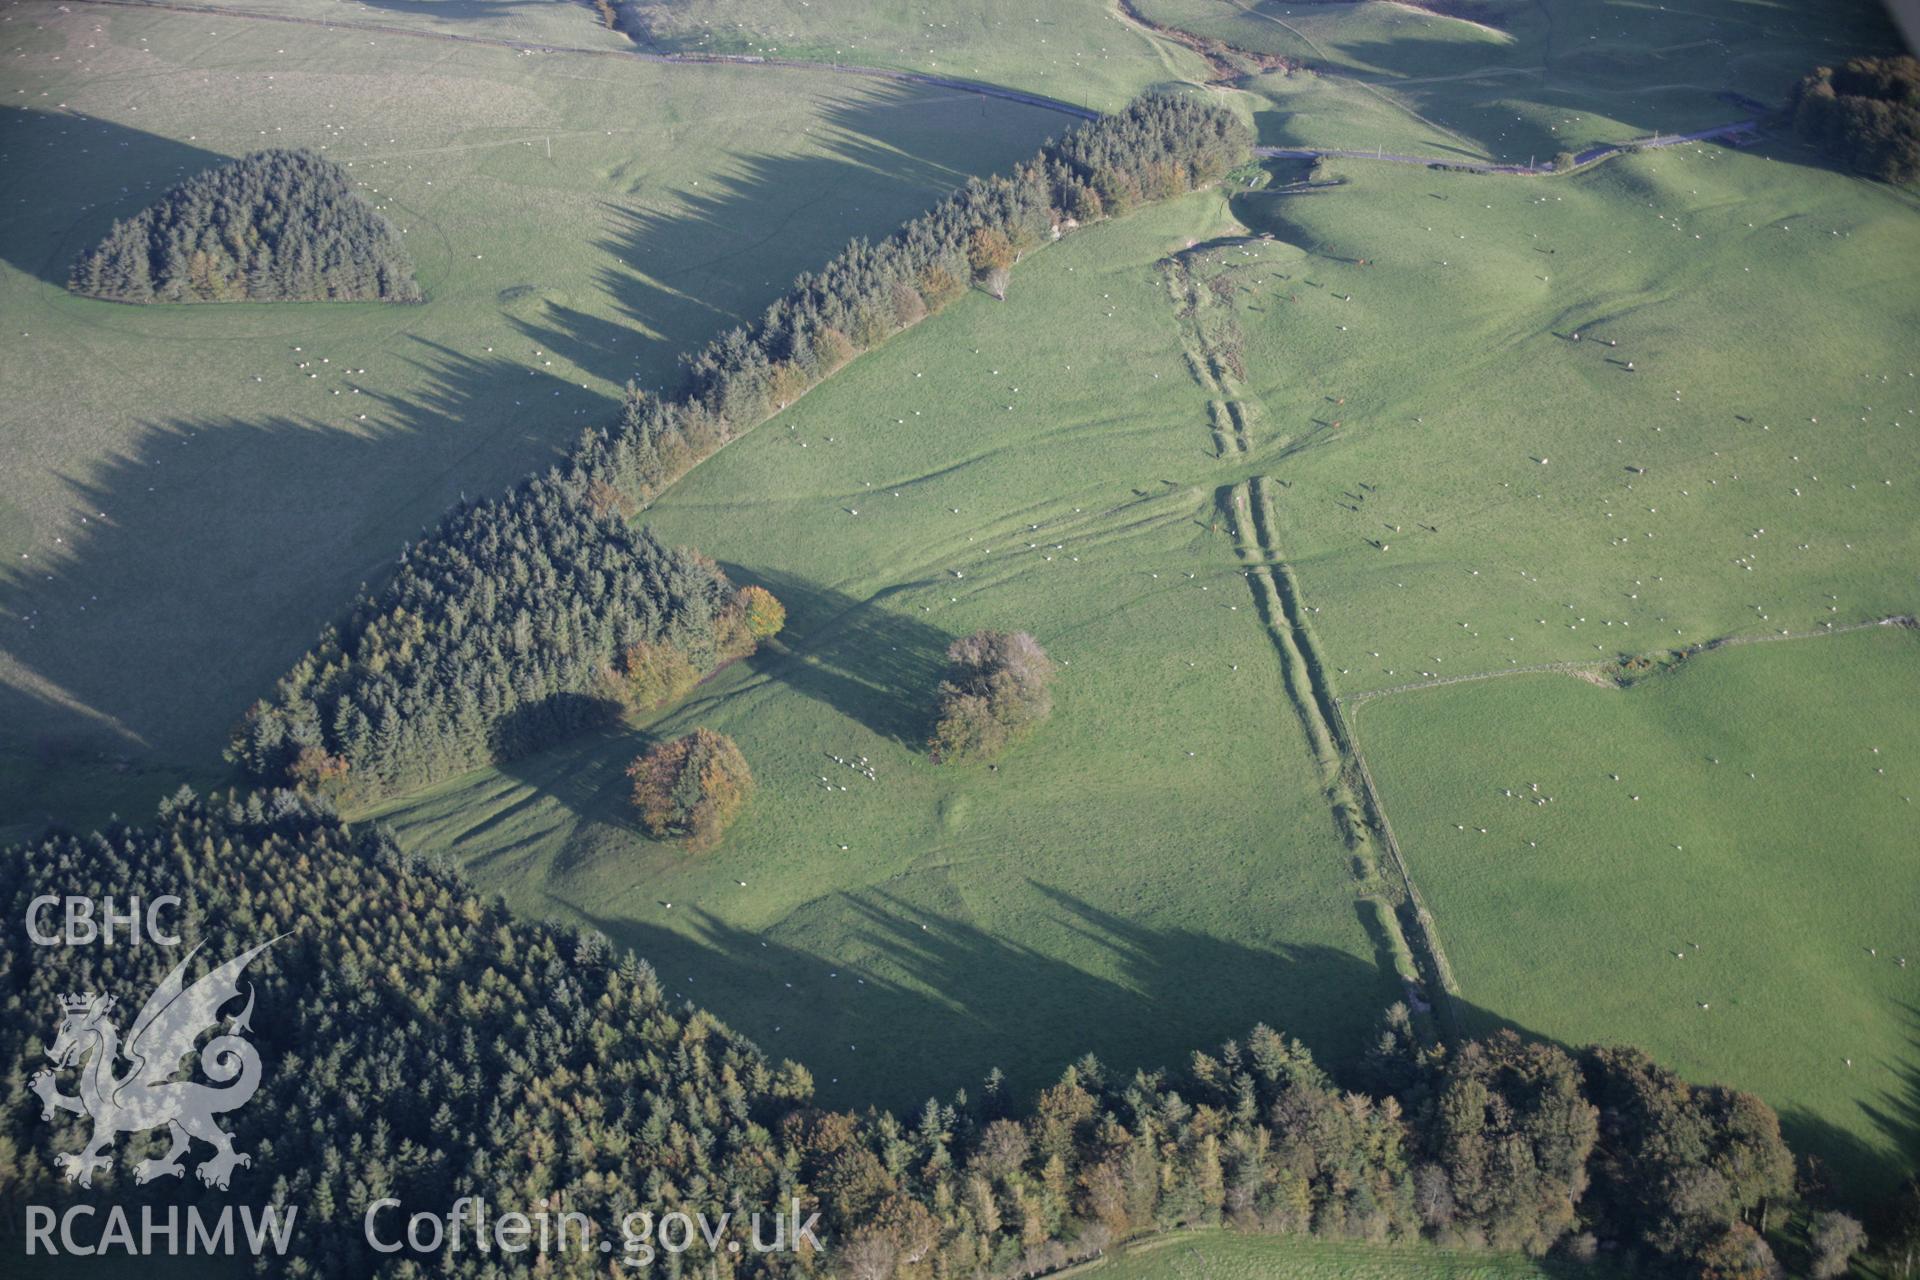 RCAHMW colour oblique aerial photograph of Crugyn Bank Dyke from the north-west. Taken on 13 October 2005 by Toby Driver